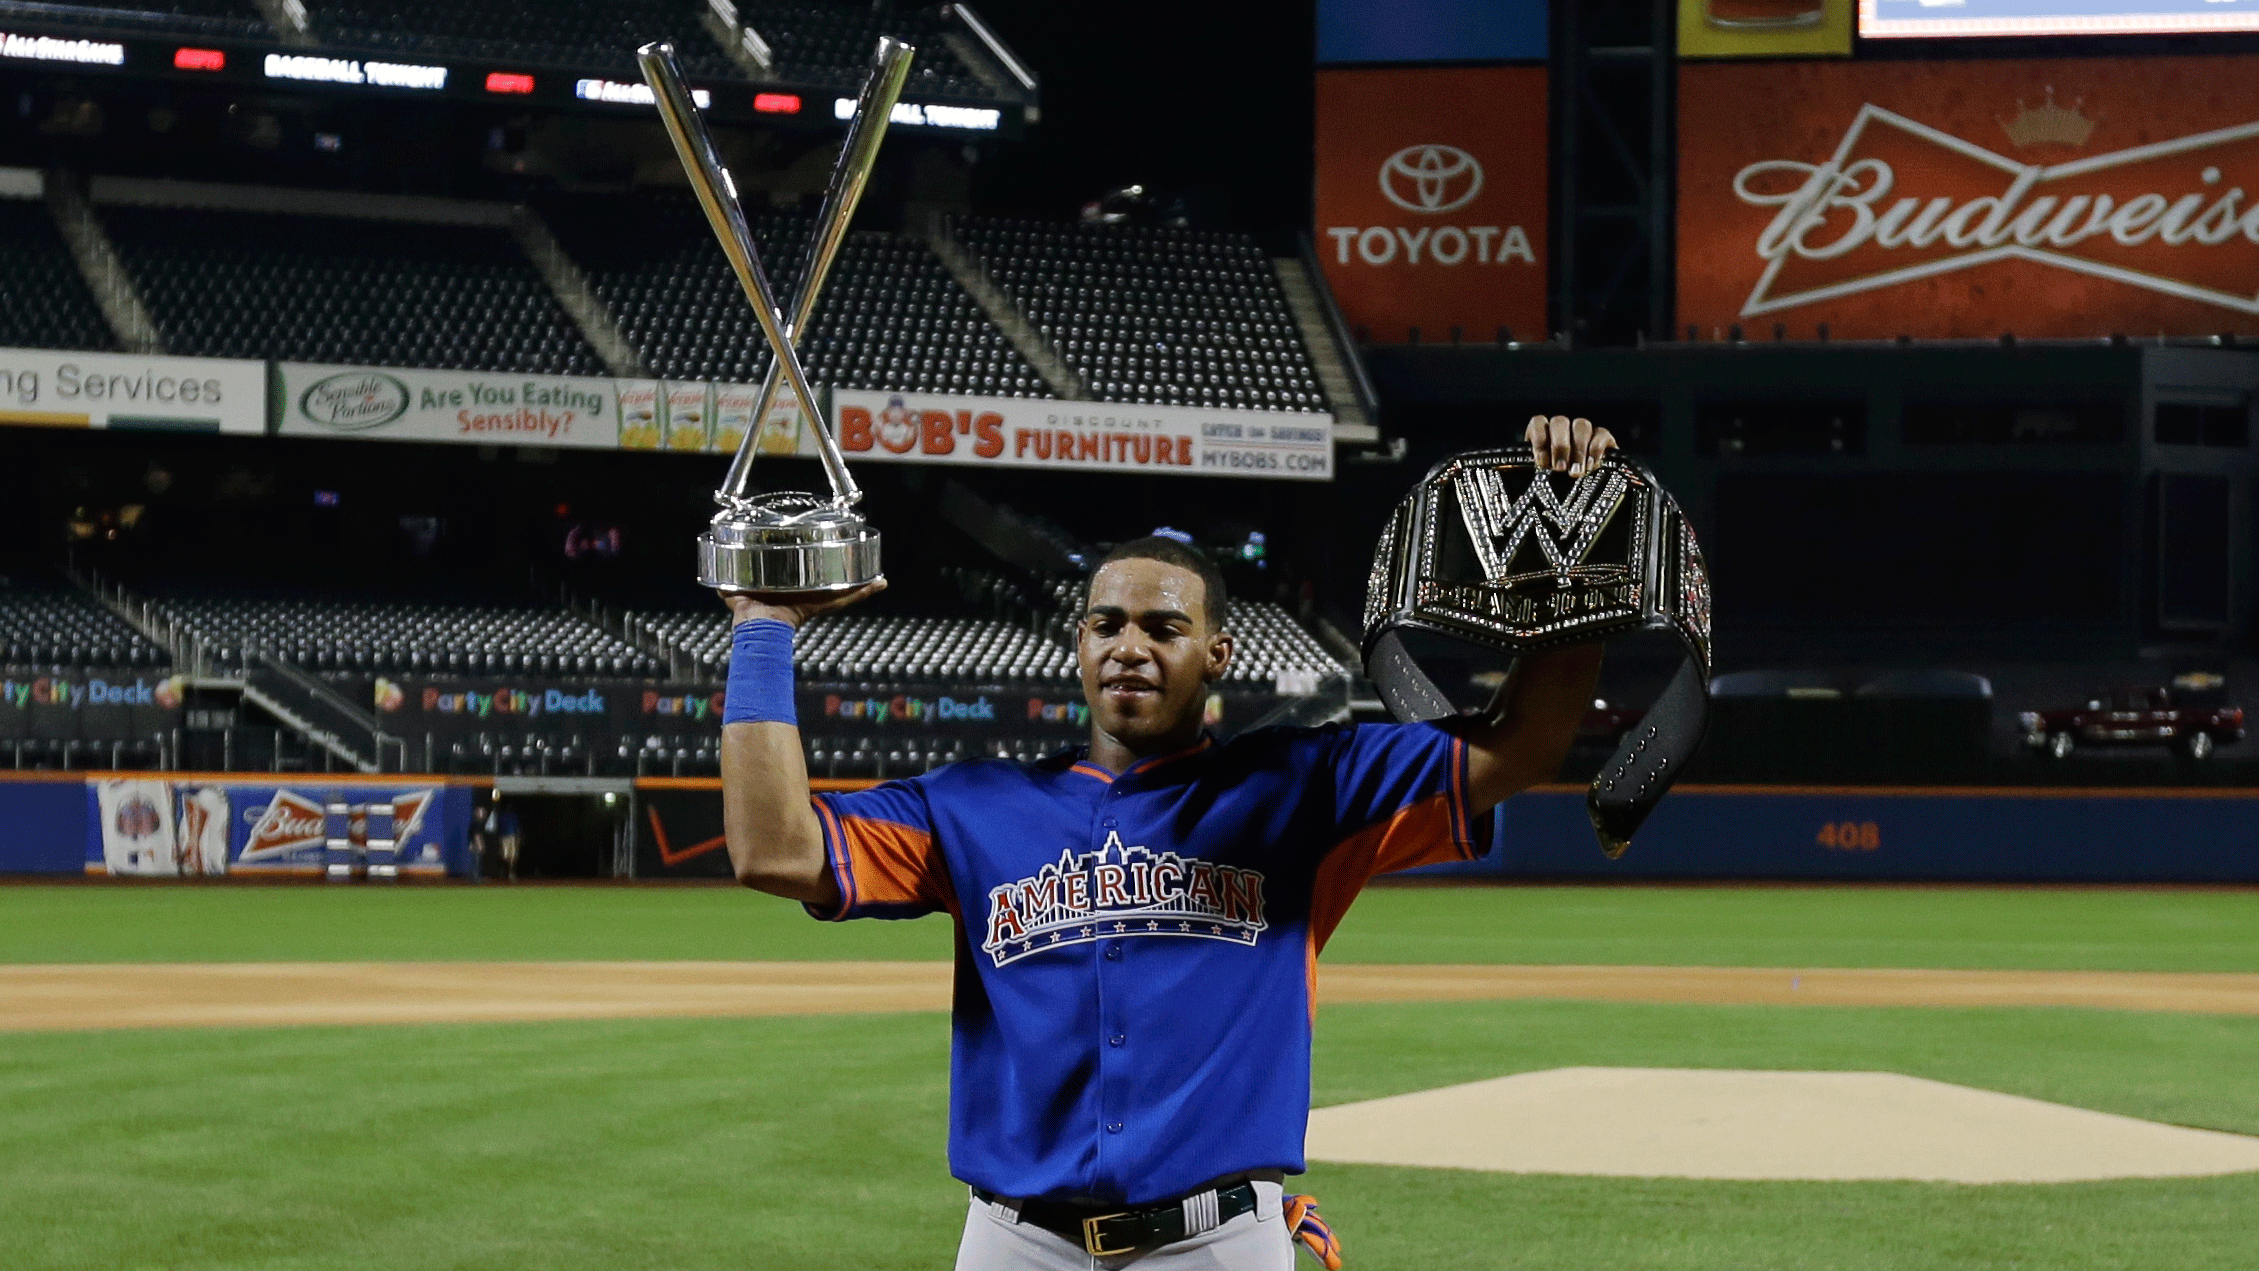 American League's Yoenis Cespedes, of the Oakland Athletics, holds the championship trophy after winning the MLB All-Star baseball Home Run Derby. (AP/Matt Slocum)